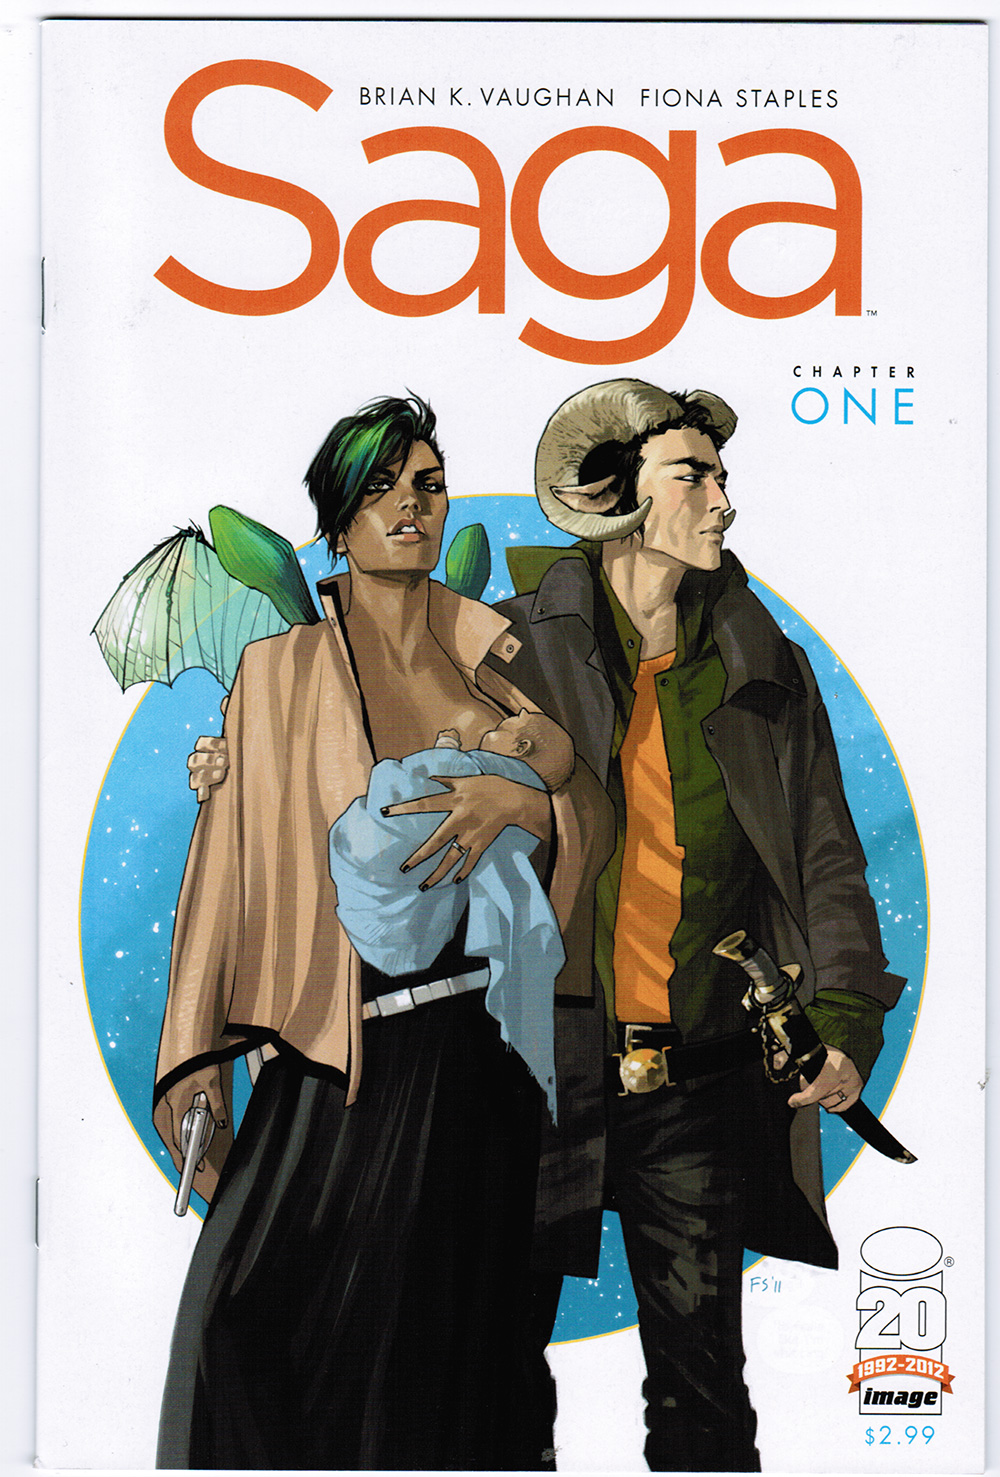 SAGA #1 1st PRINT BRIAN K VAUGHAN Fiona Staples NEW SERIES SOLD OUT 